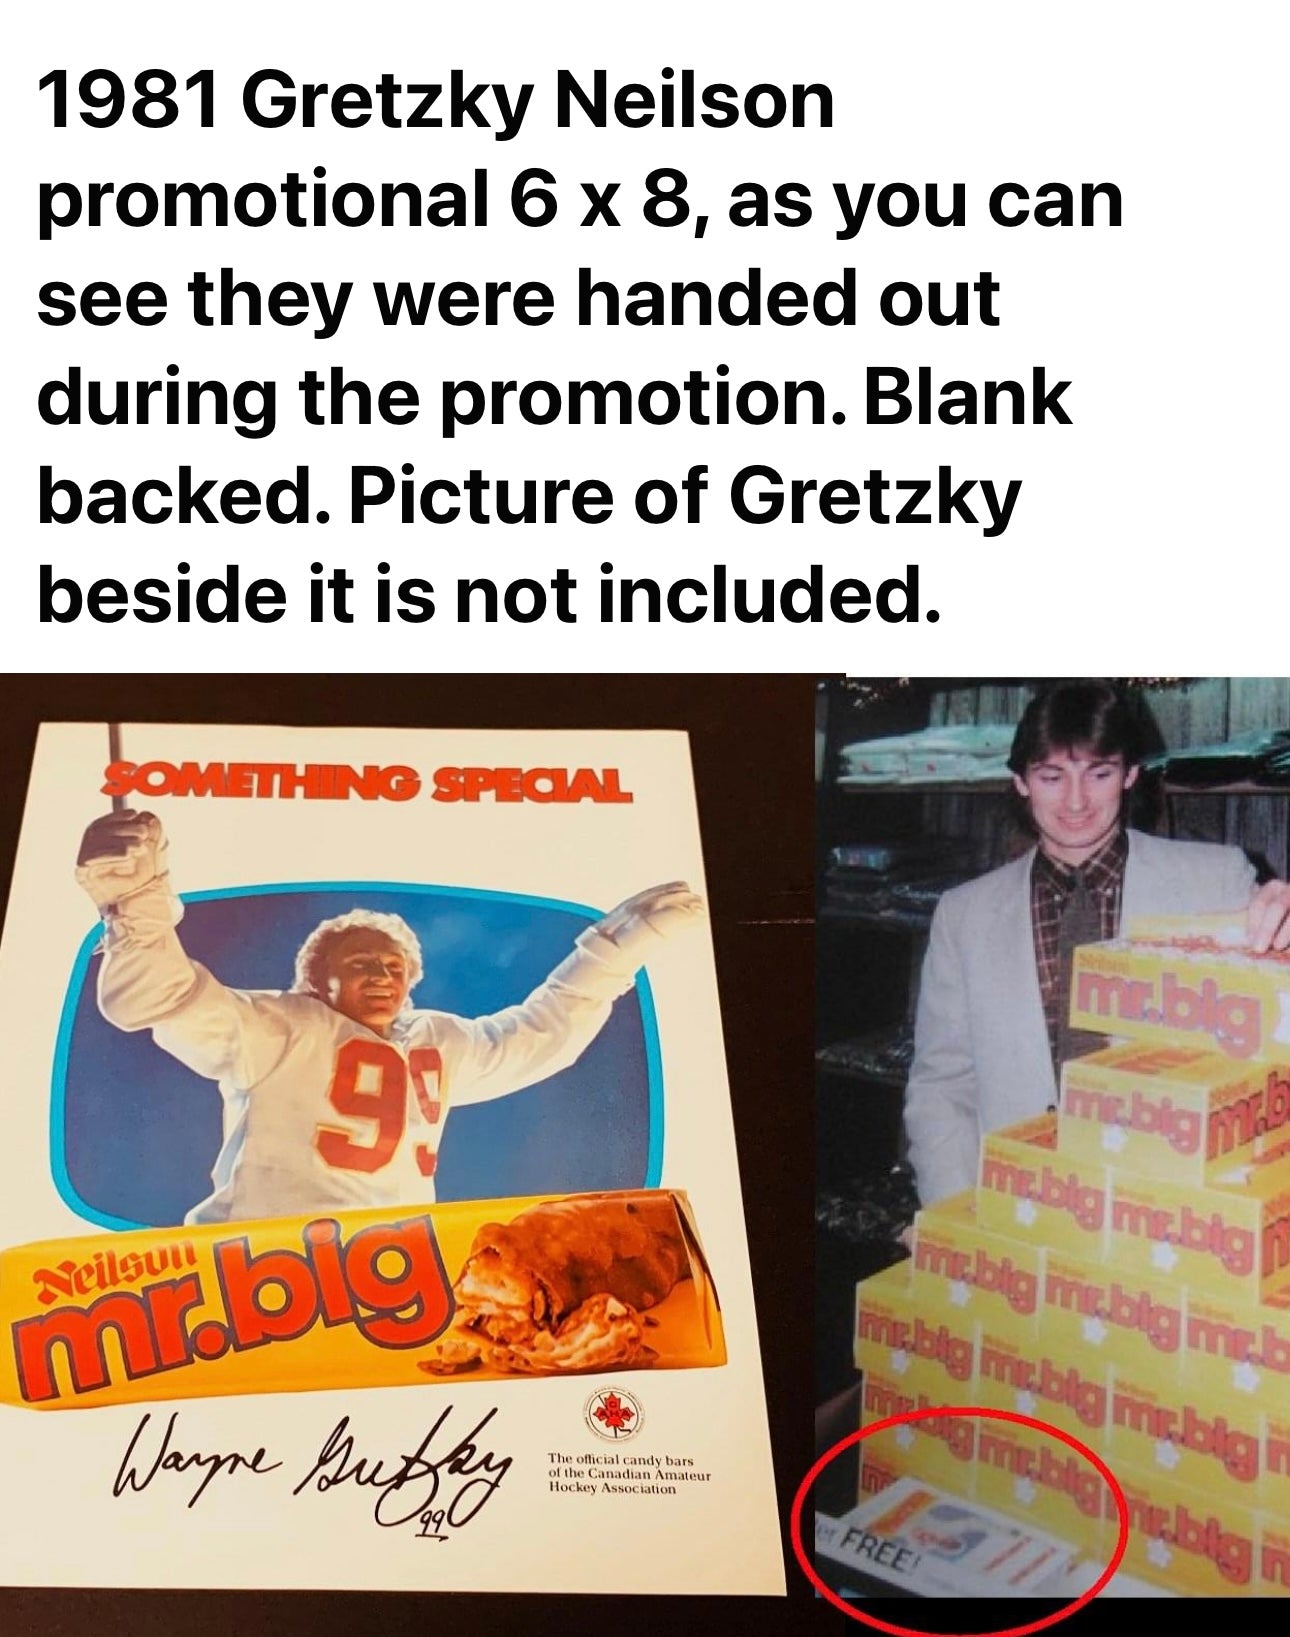 Wayne Gretzky Mr. Big rare press proof cardboard 8x10 size ad 1980s. Look at the second pic of Gretzky back in 1980s doing this promotion! Cool.